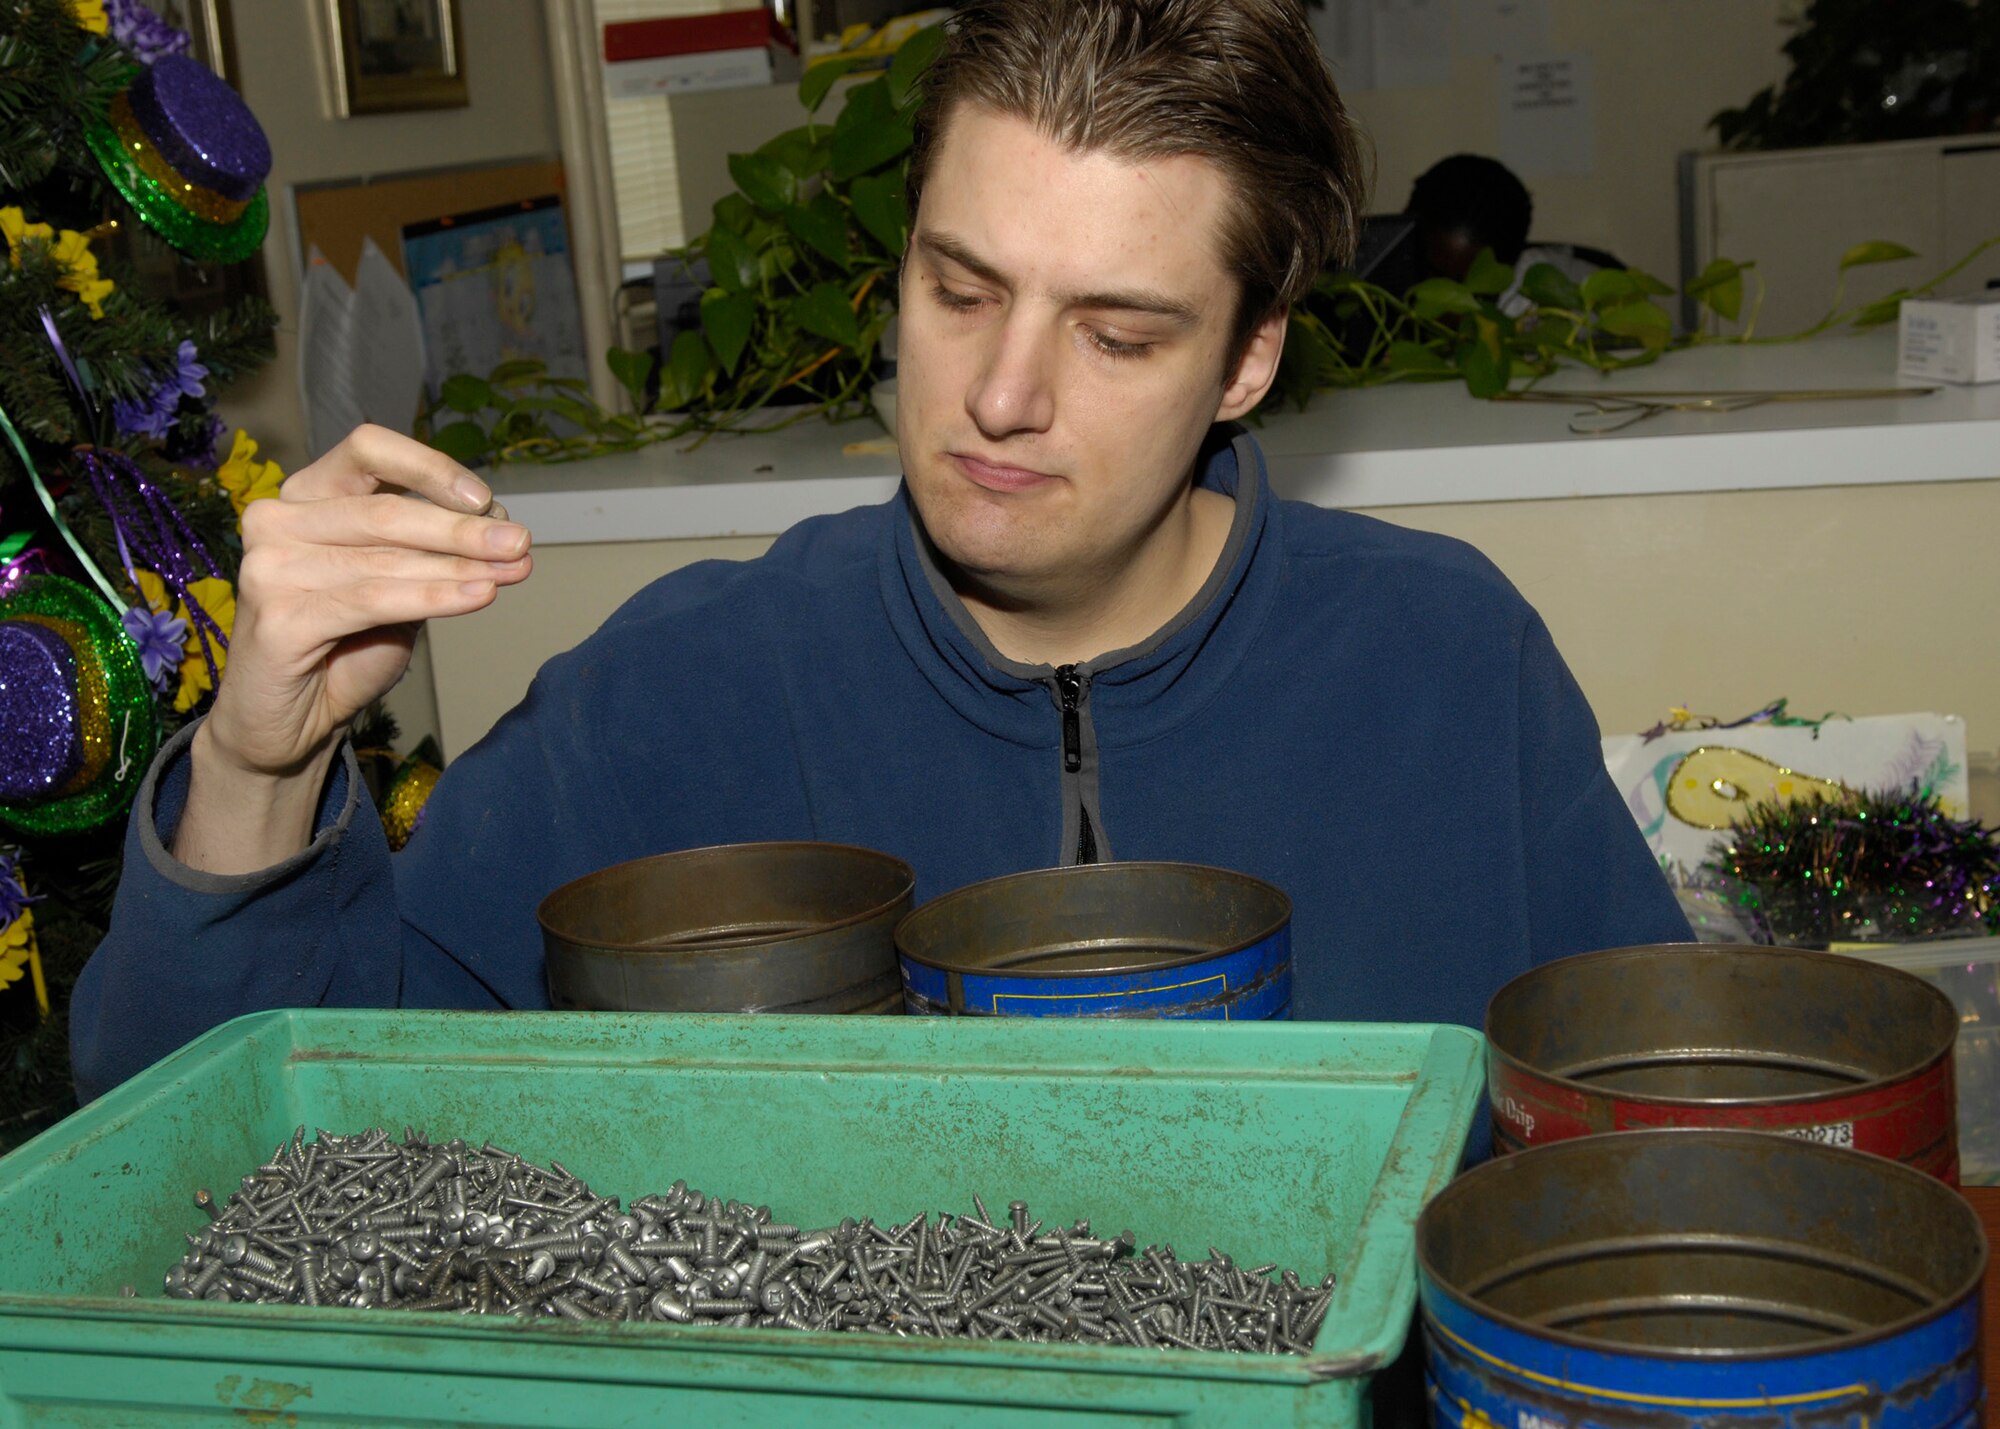 A client seperates nuts and bolts into various cans at the HAP house. (Senior Airman Alexandra M. Sandoval/U.S. Air Force)